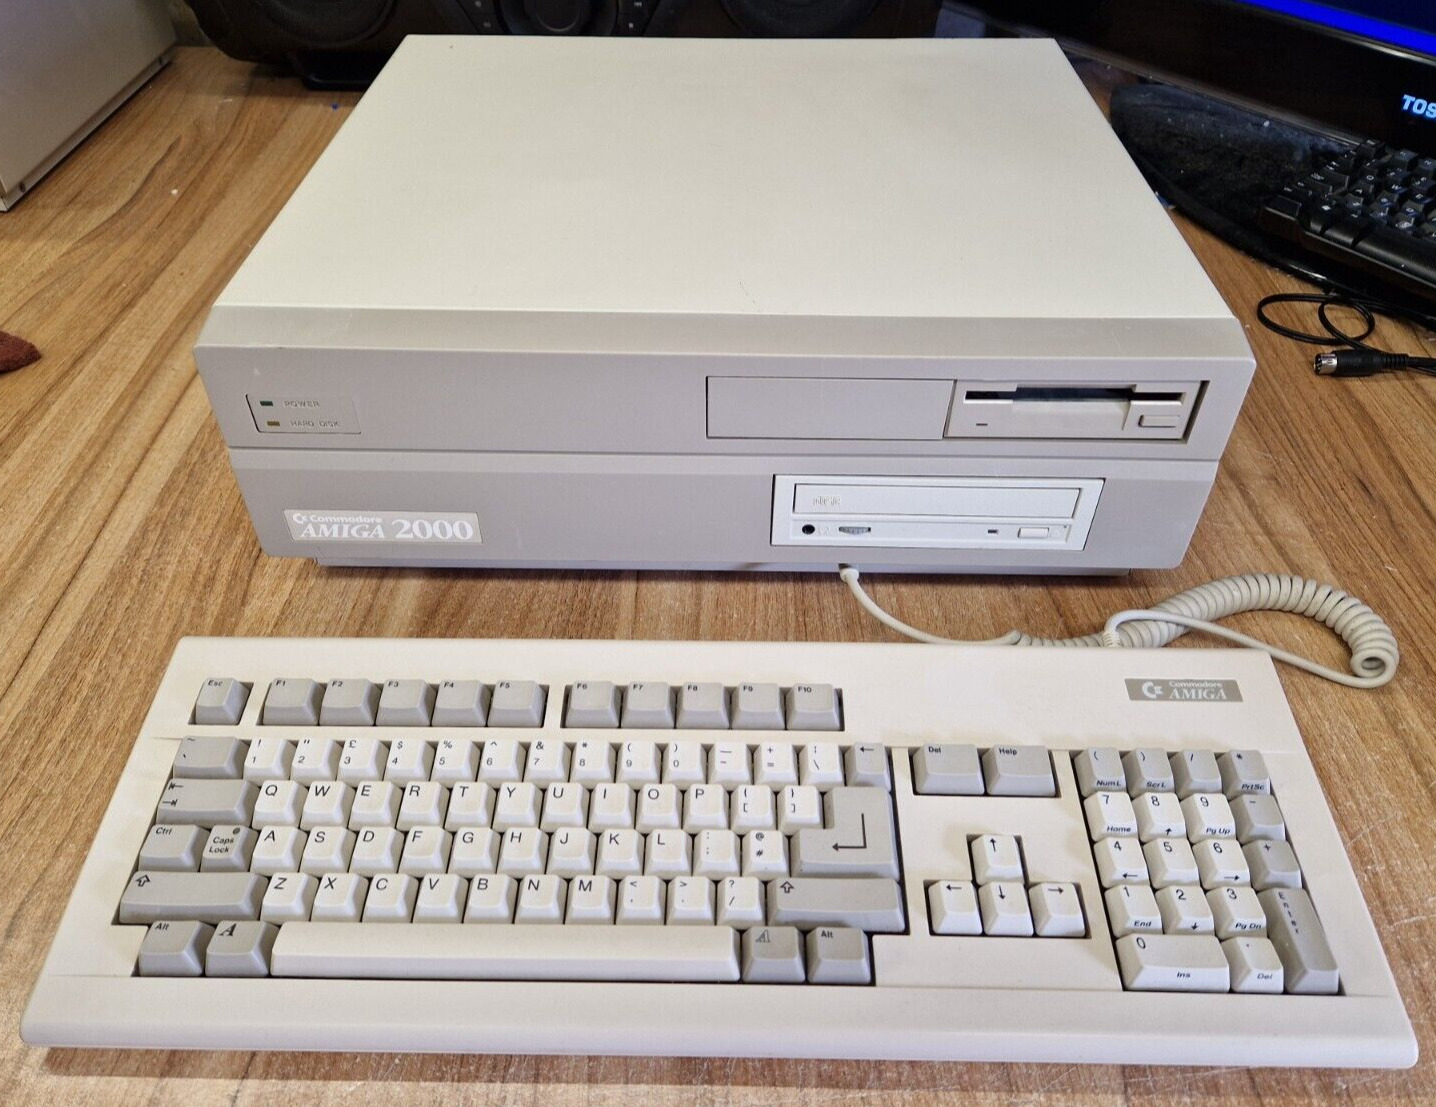 PAL Amiga 2000 with 244Mb HD and 5Mb Ram & WB 3.1 Rom & CD Rom Drive